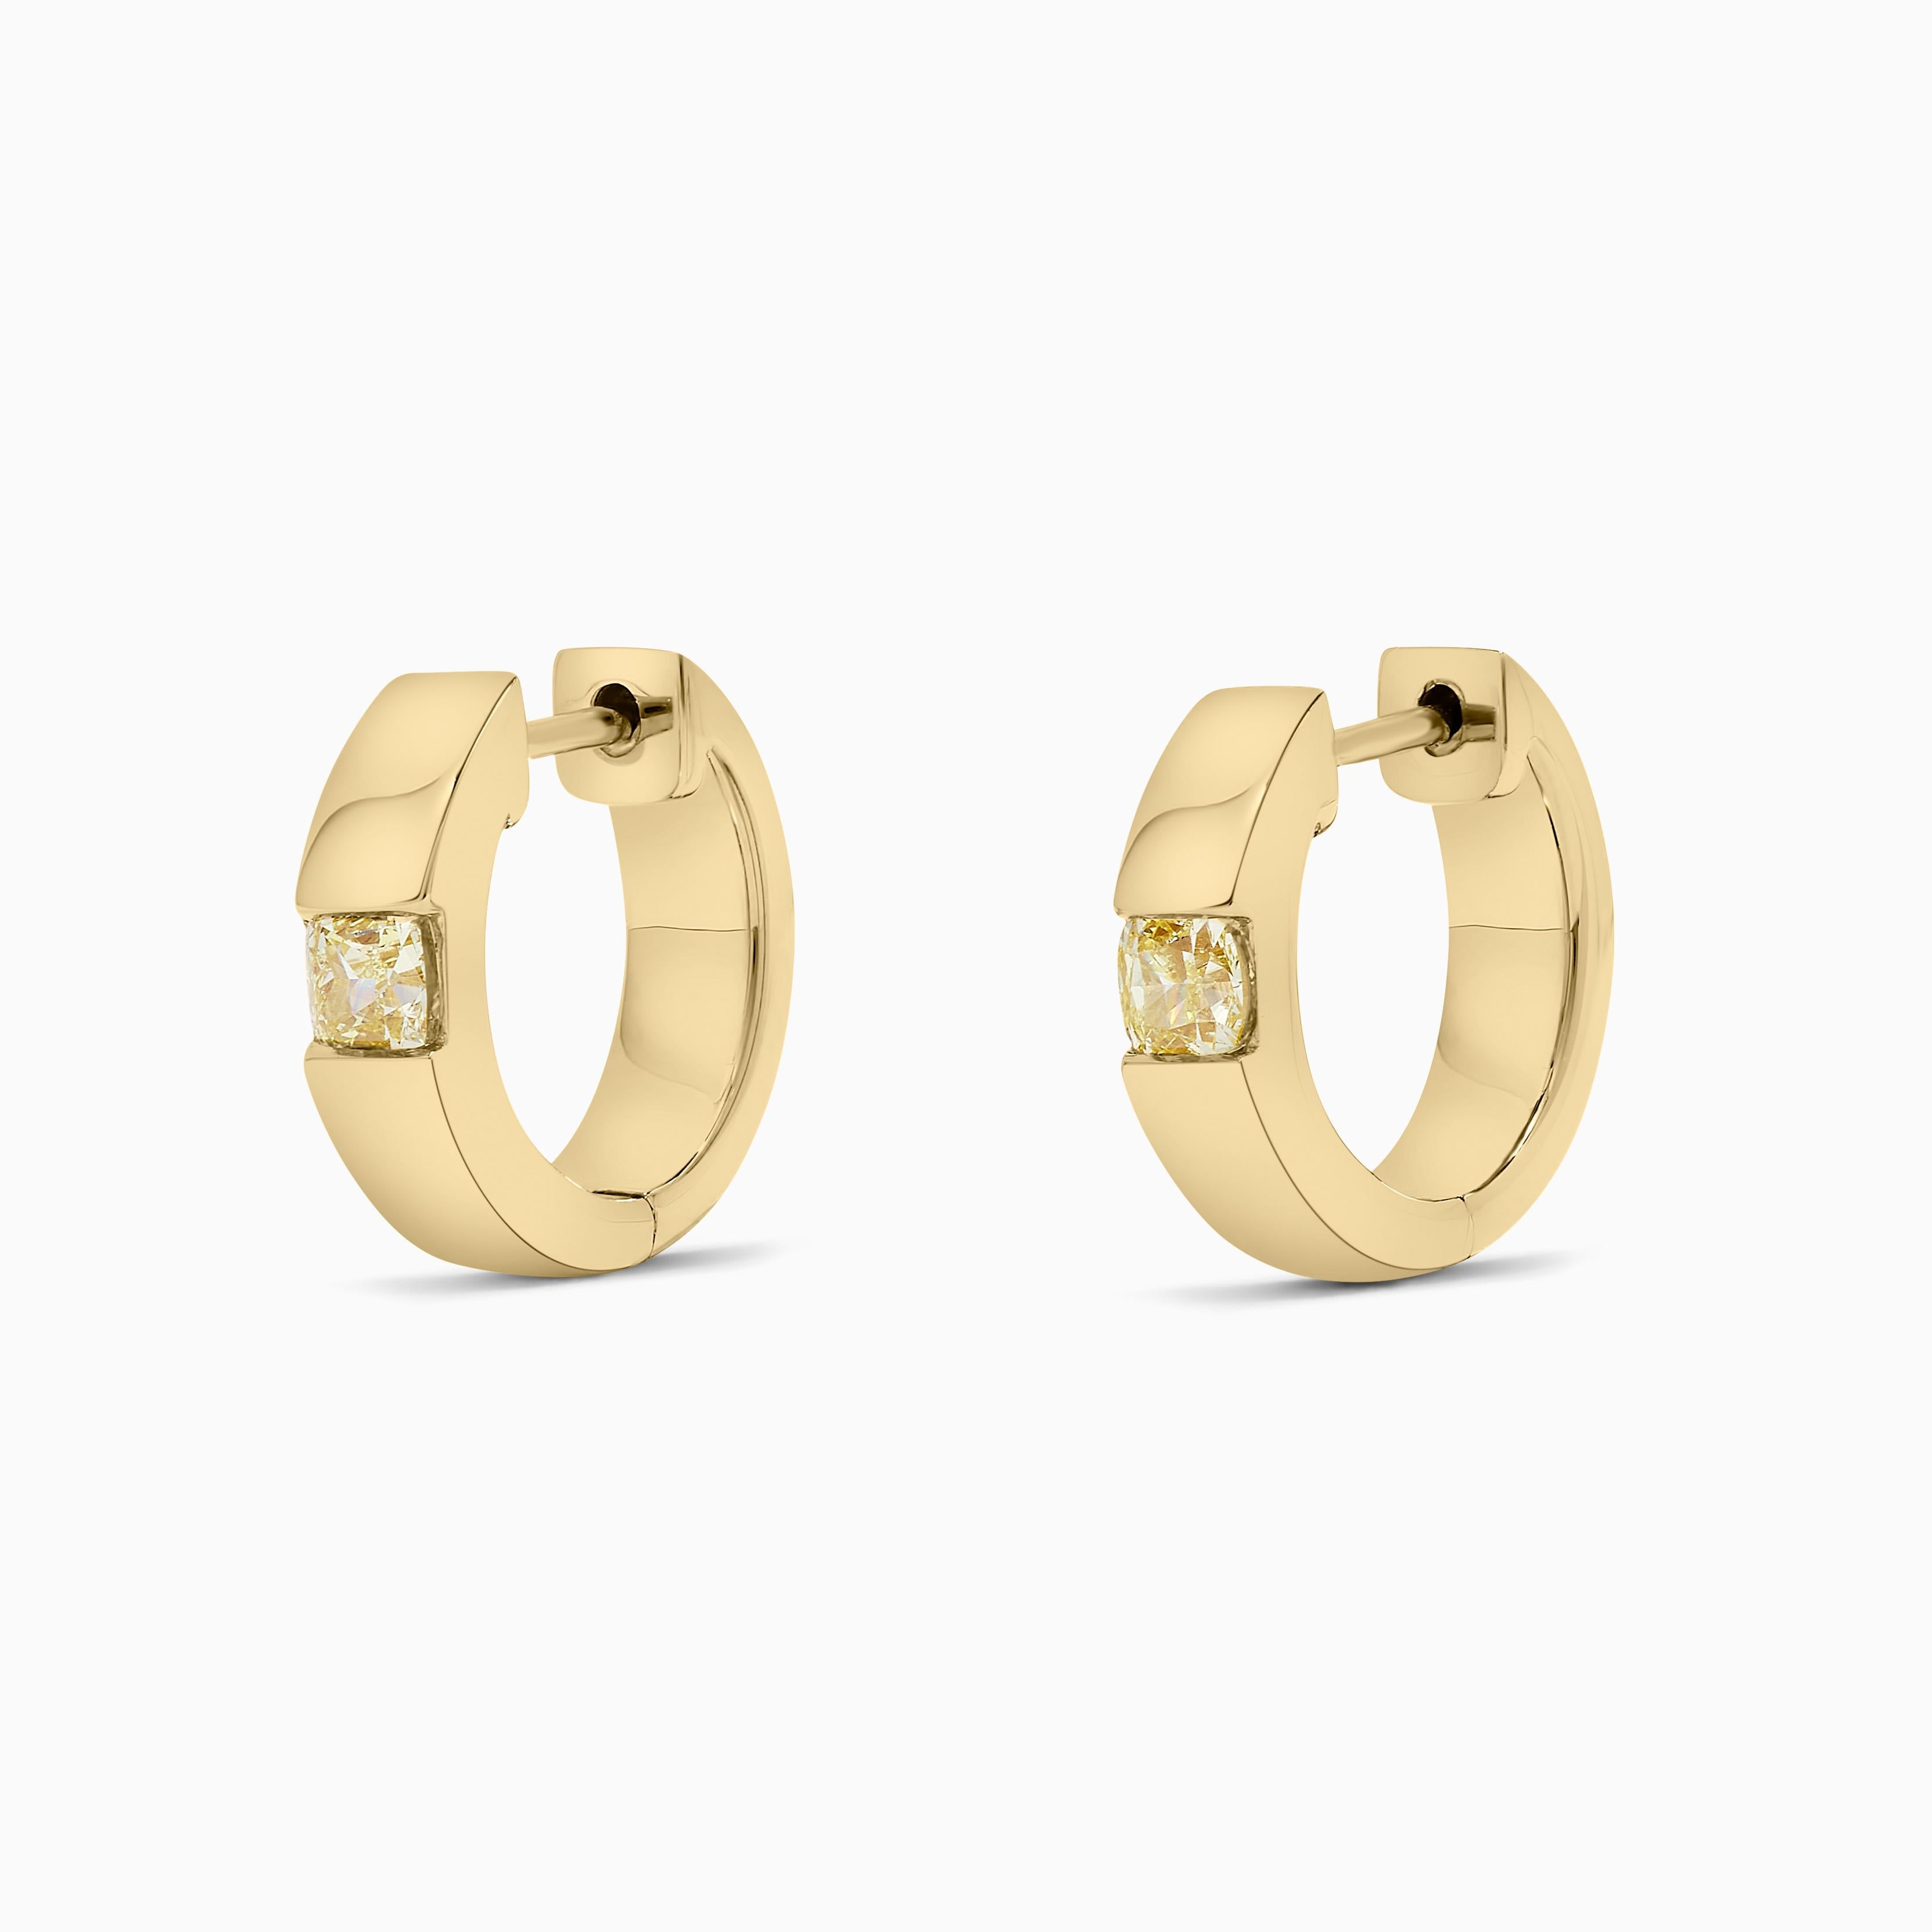 Contemporary Natural Yellow Cushion Diamond .60 Carat TW Yellow Gold Hoop Earrings For Sale